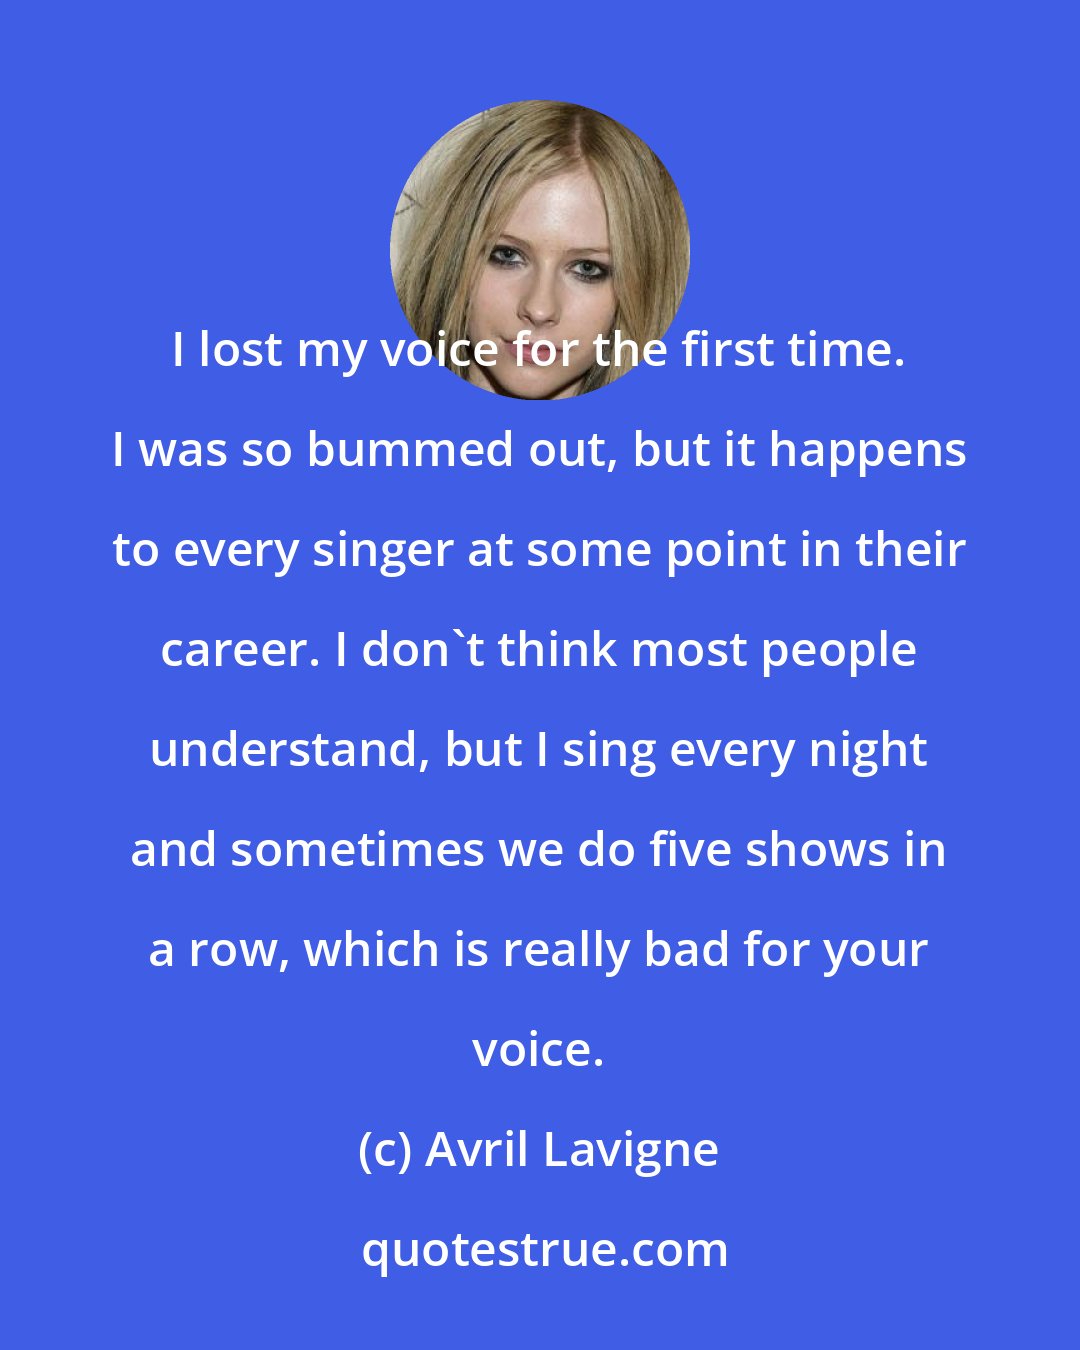 Avril Lavigne: I lost my voice for the first time. I was so bummed out, but it happens to every singer at some point in their career. I don't think most people understand, but I sing every night and sometimes we do five shows in a row, which is really bad for your voice.